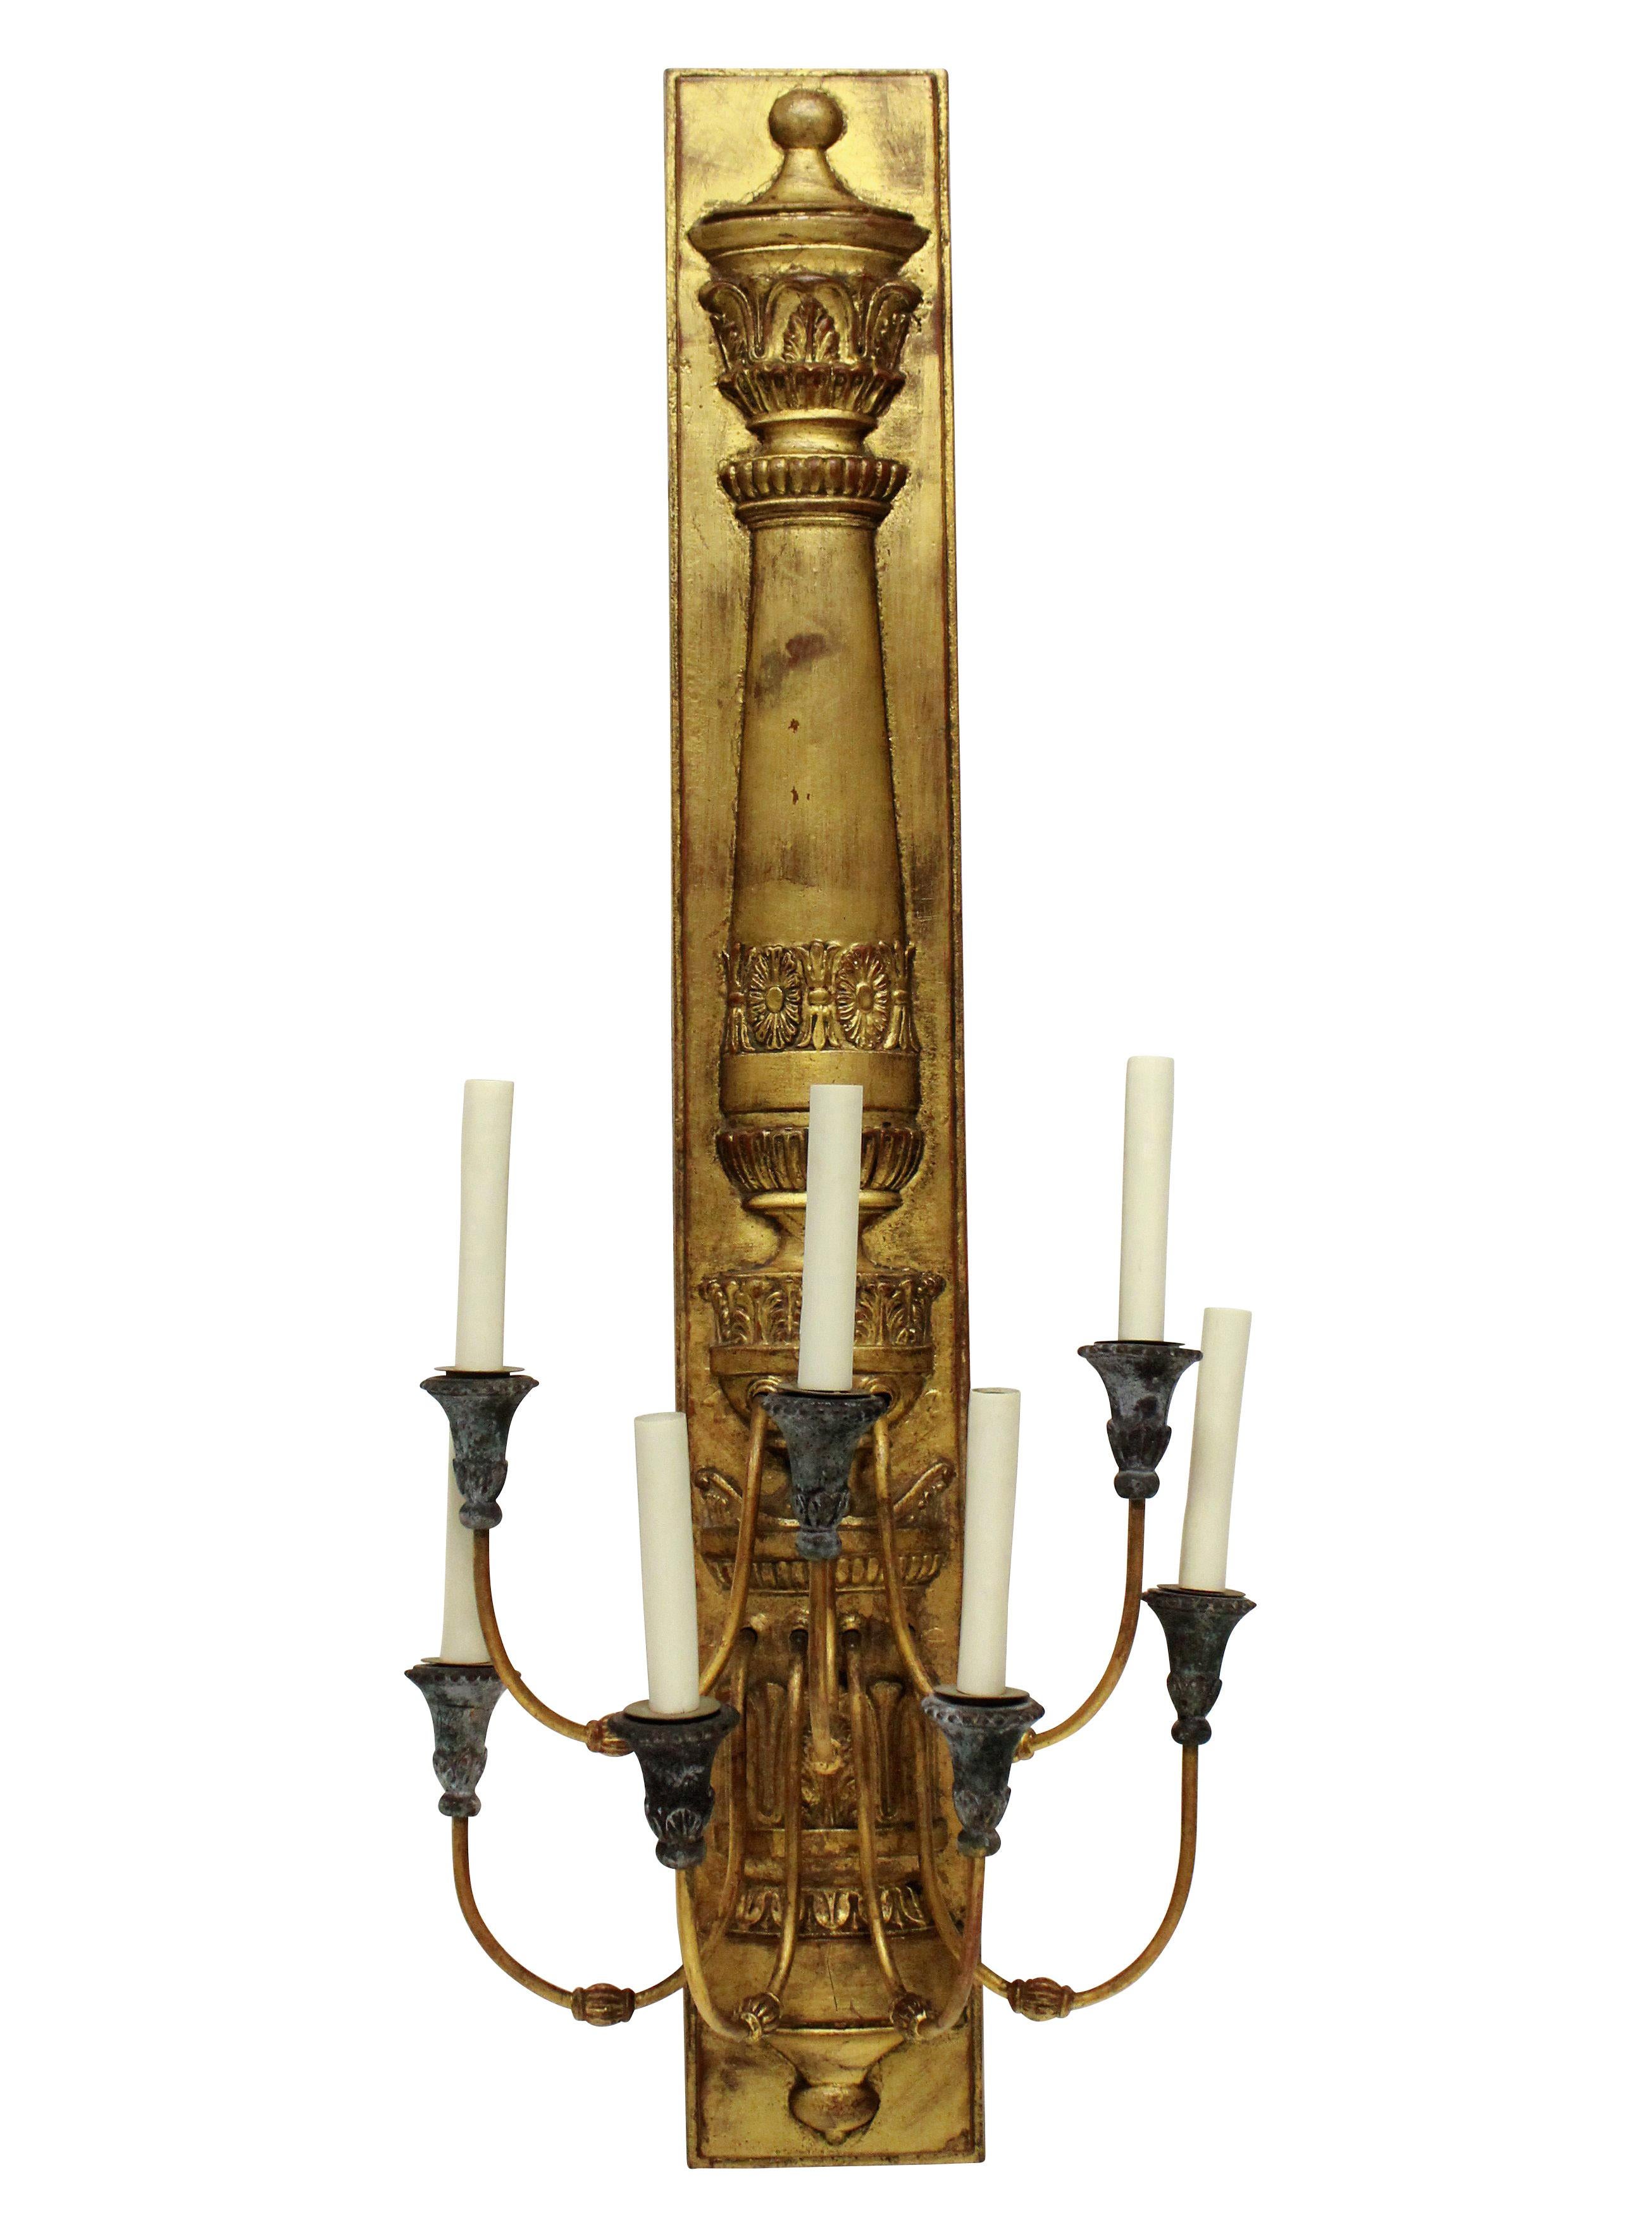 A pair of large French Empire style gilt metal wall sconces, each with five lights.

